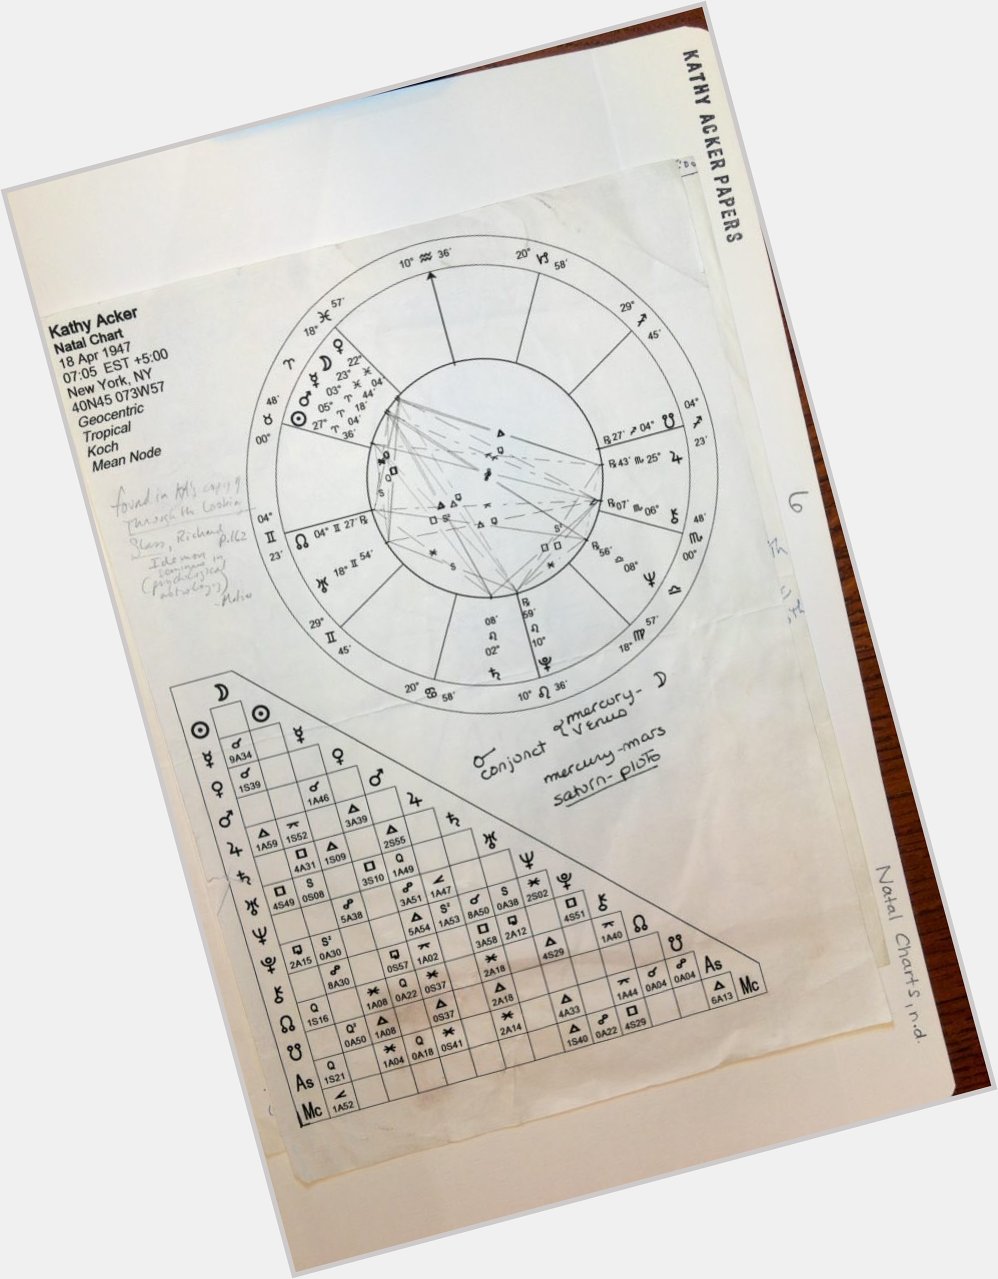 Happy Birthday to Kathy Acker. Here is a copy of her birthchart cart in Koch system from her actual archive. 